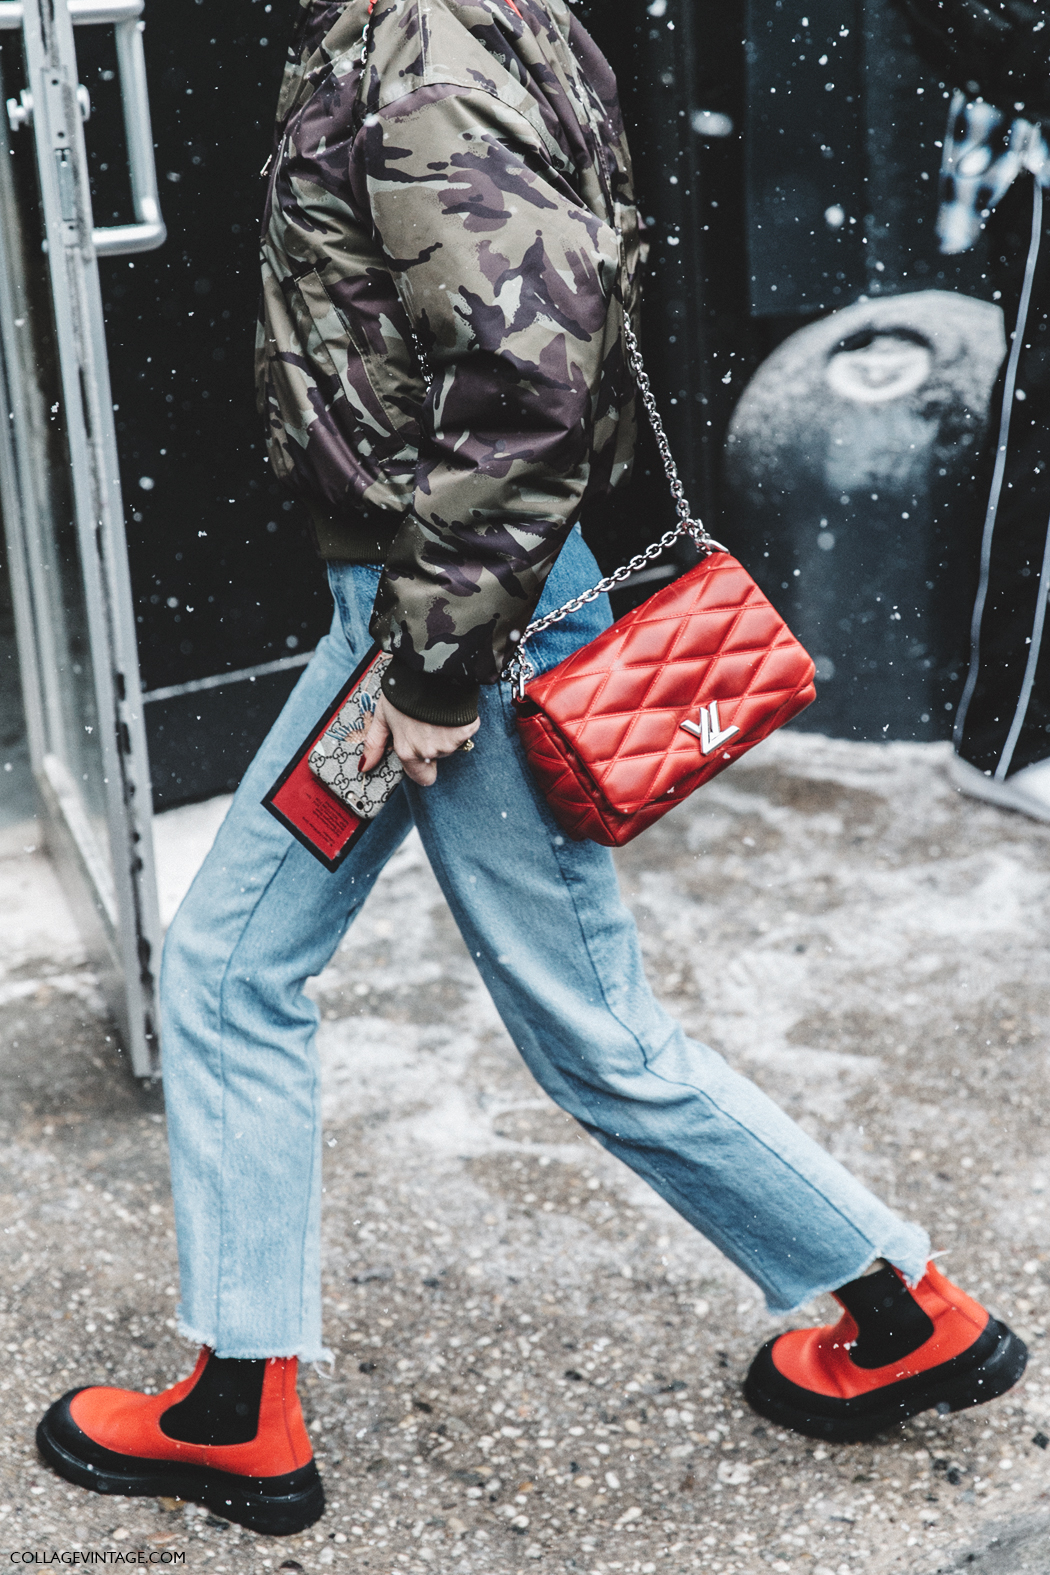 NYFW-New_York_Fashion_Week-Fall_Winter-17-Street_Style-Pernille_Teisbaek-Military_Trend-Bomber-Vetements_Jeans-Rainy_Boots-Red_Bag-2